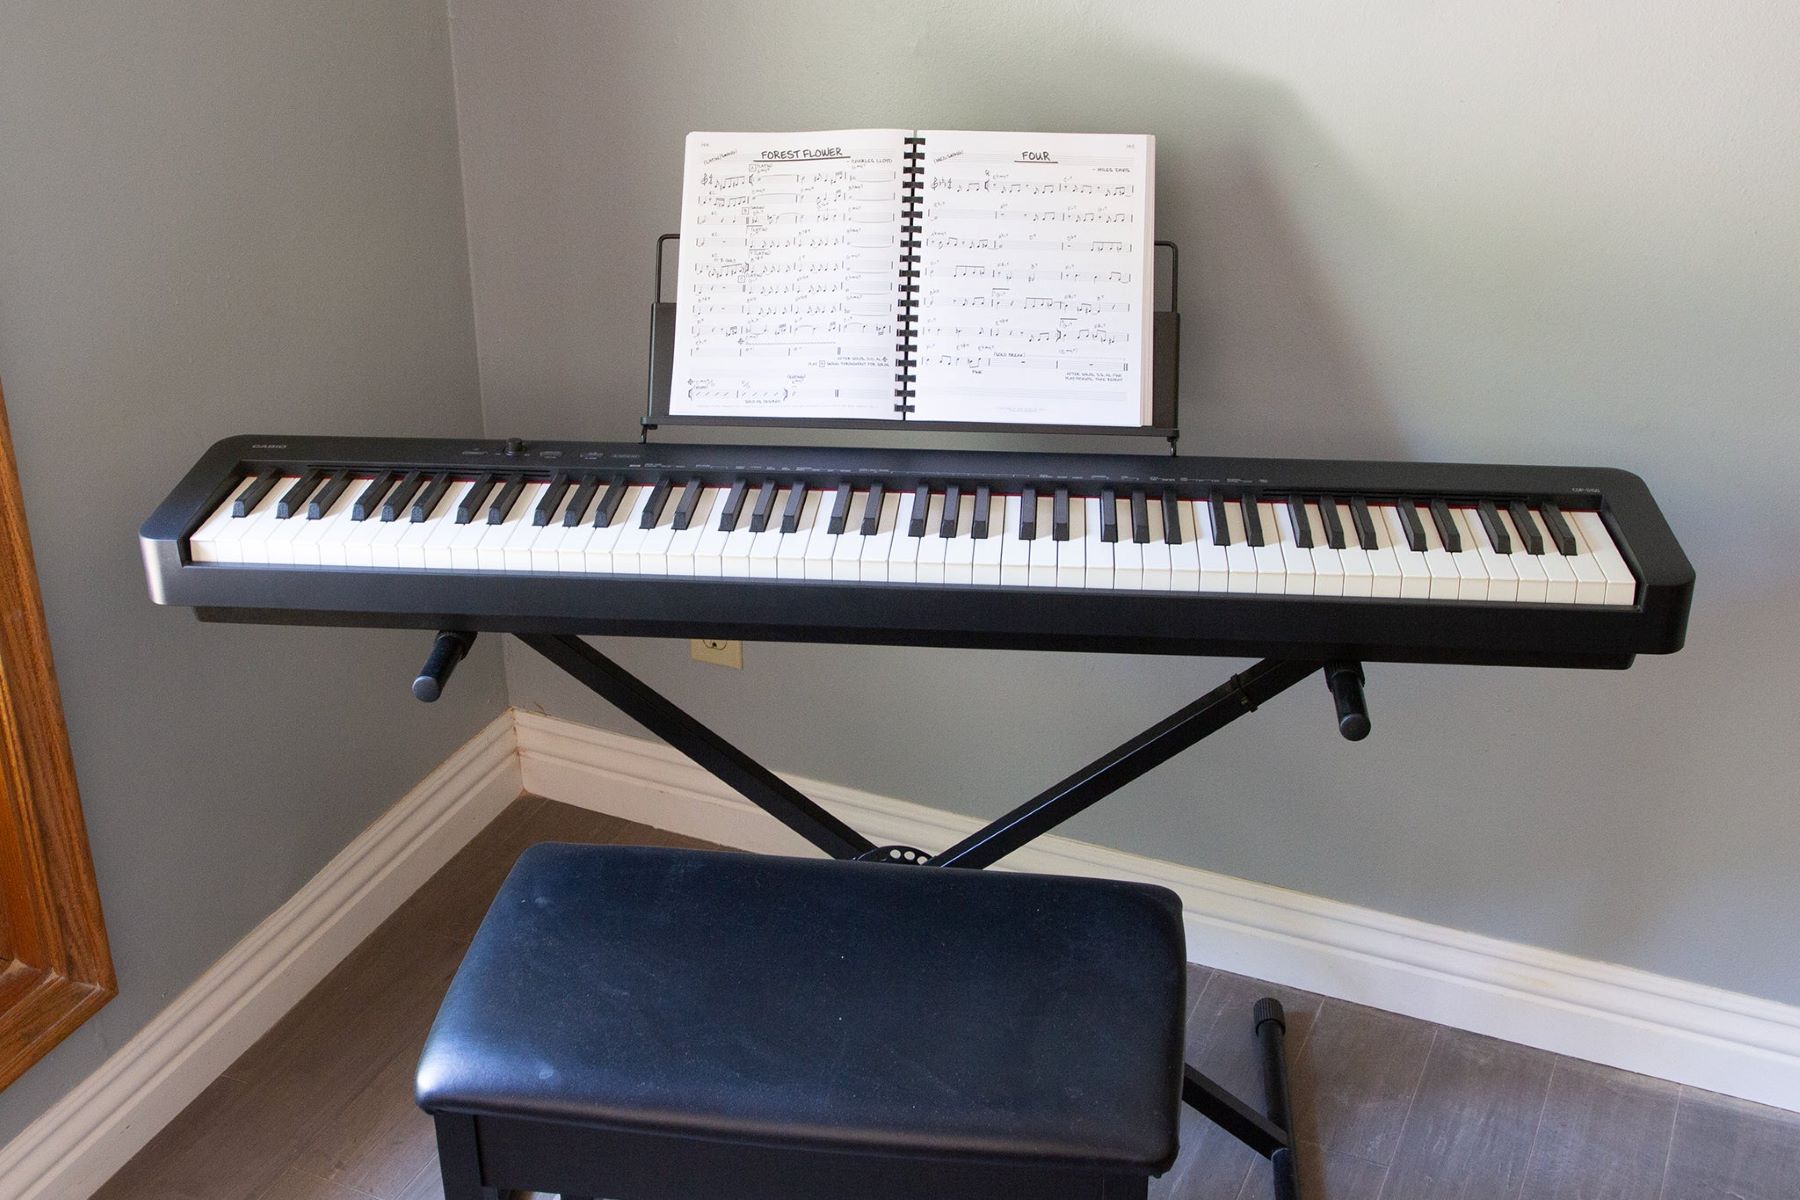 what-other-equipment-will-i-need-for-playing-a-show-with-a-digital-piano